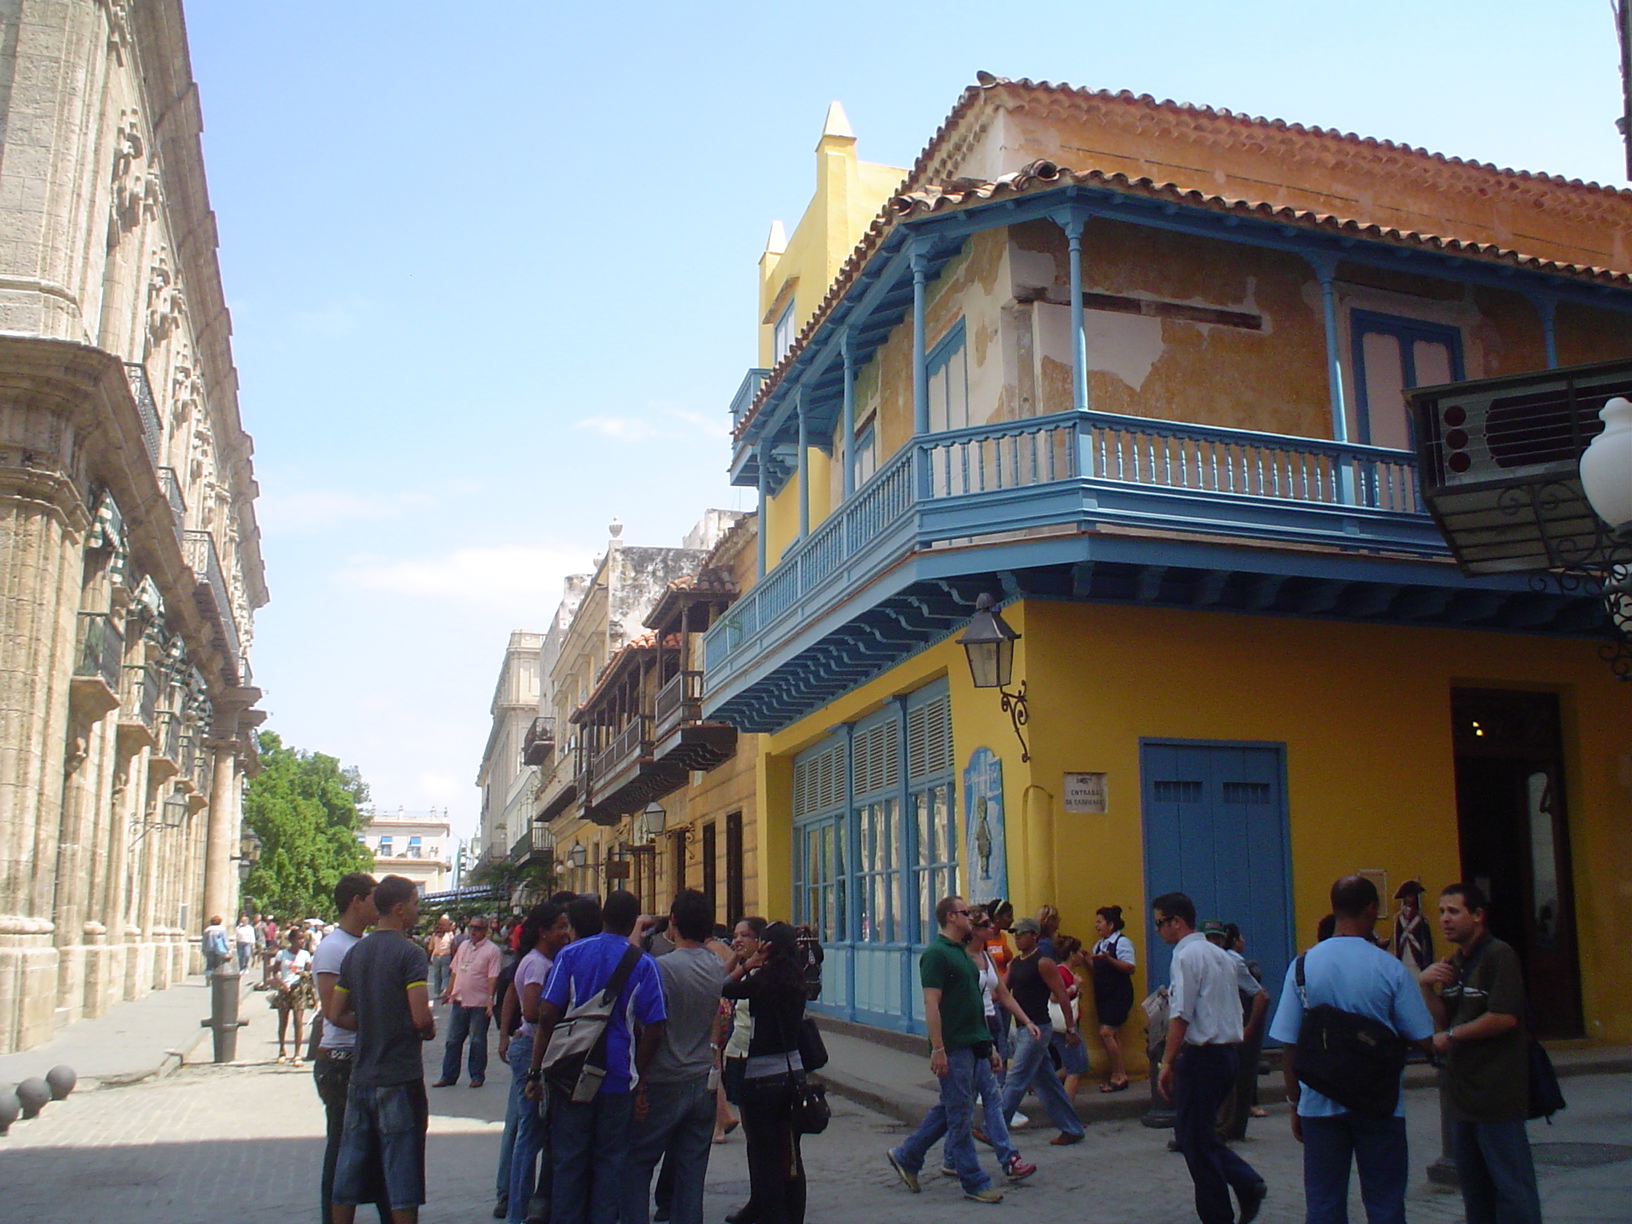 Image for World Heritage Sites in Cuba - Old Havana. Photo by Isabel Rigol-Savio